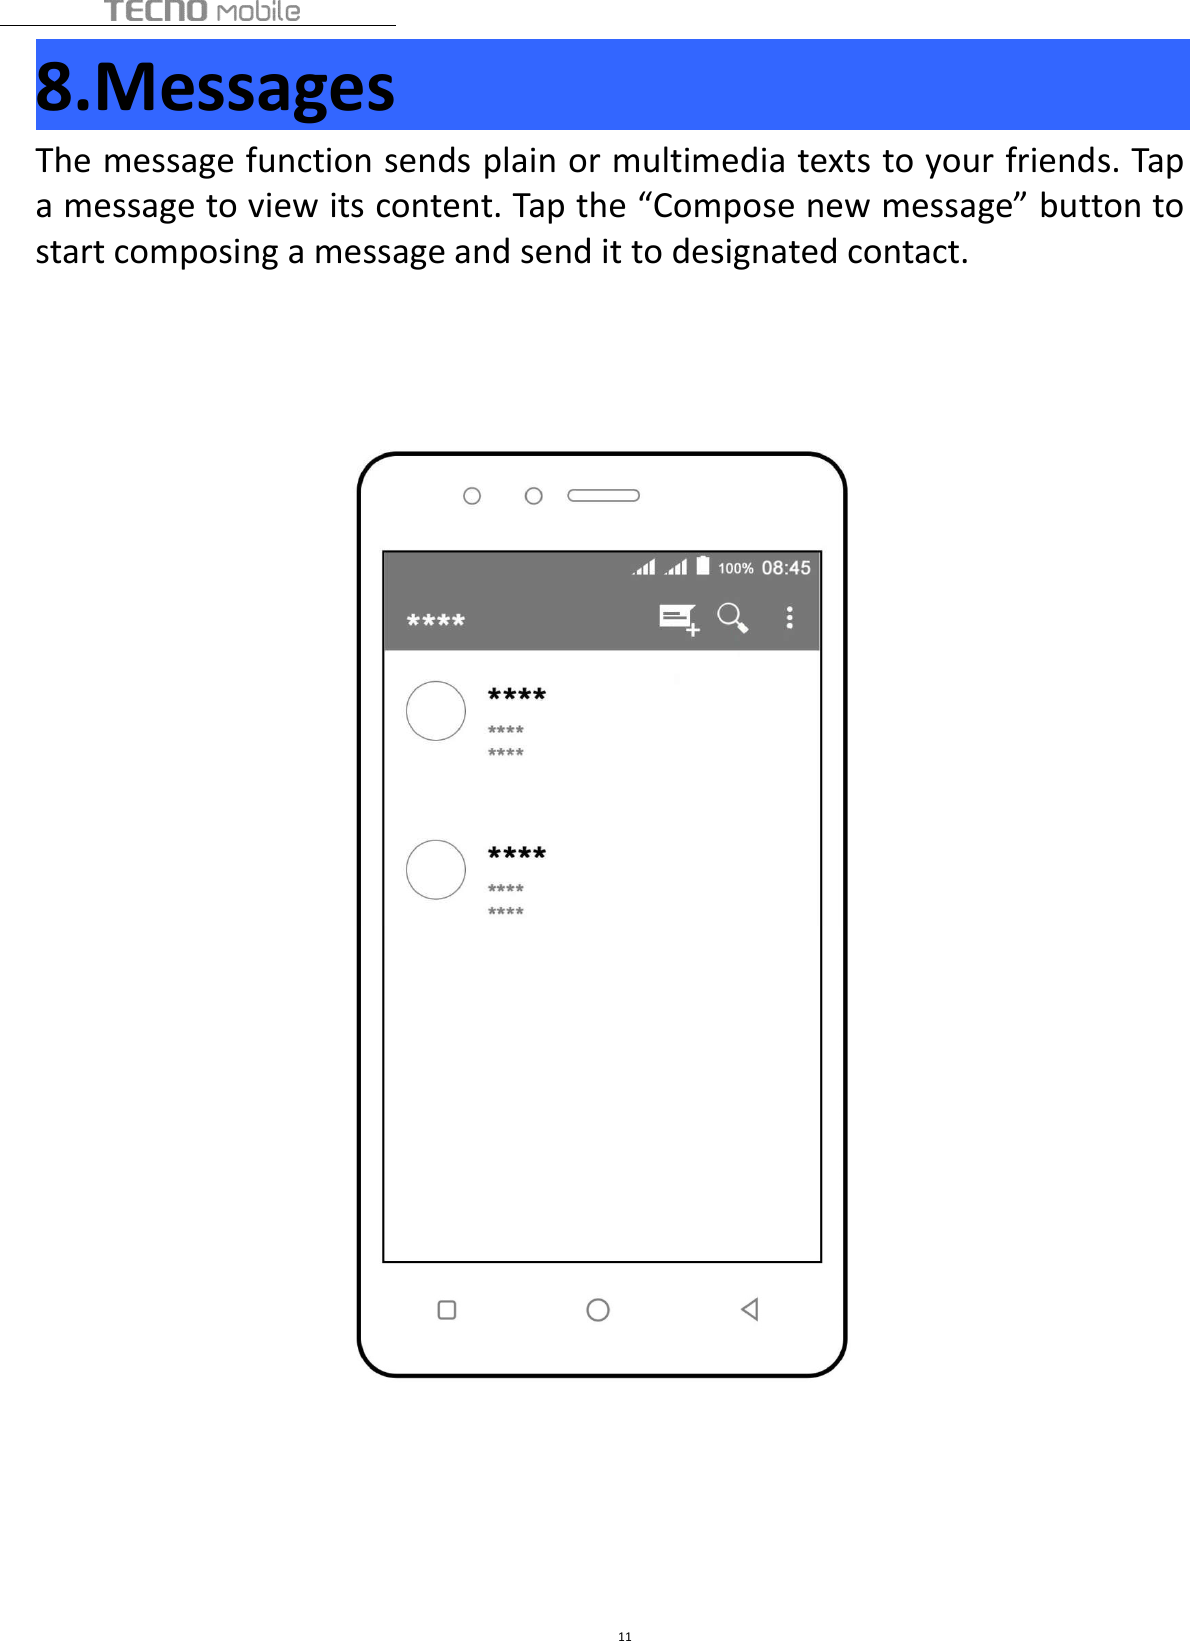 118.MessagesThe message function sends plain or multimedia texts to your friends. Tapa message to view its content. Tap the “Compose new message” button tostart composing a message and send it to designated contact.